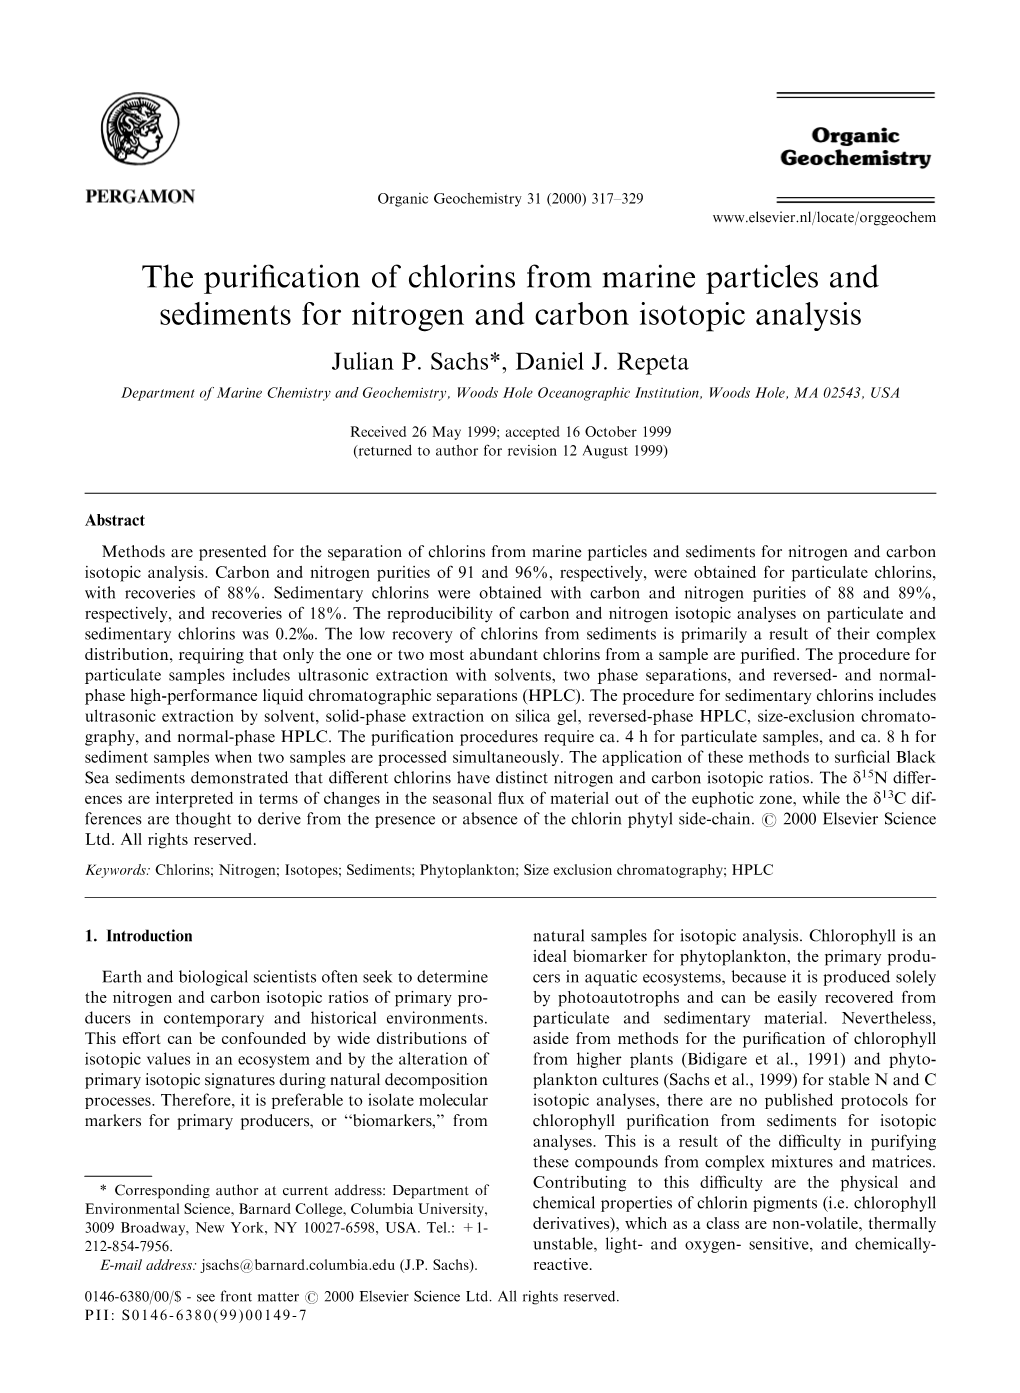 The Purification of Chlorins from Marine Particles and Sediments For